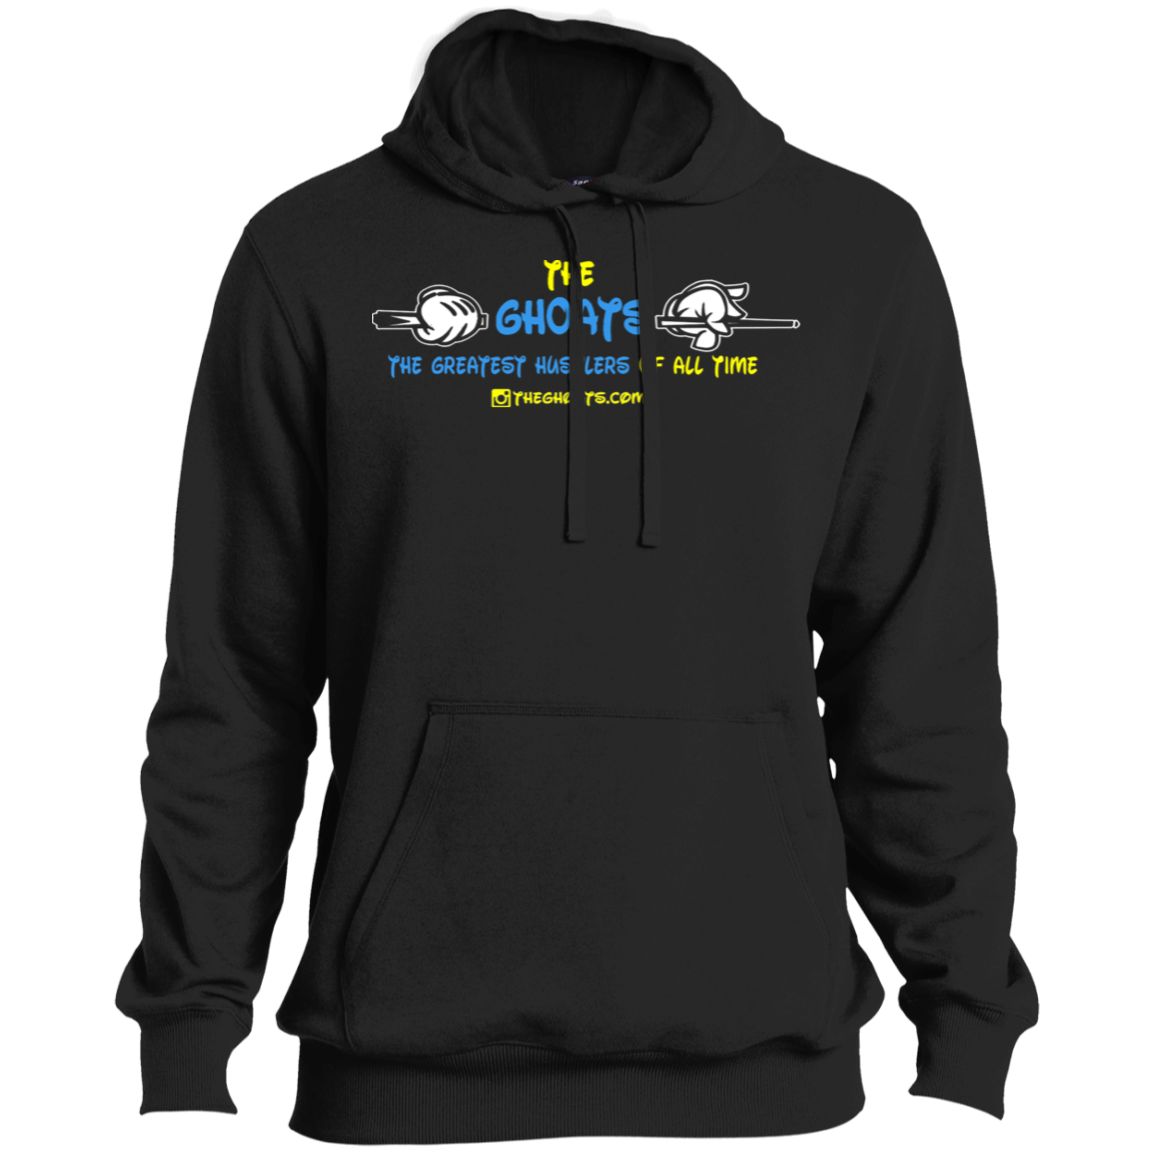 The GHOATS custom design #14. The Happiest Place On Earth. Fan Art. Ultra Soft Pullover Hoodie